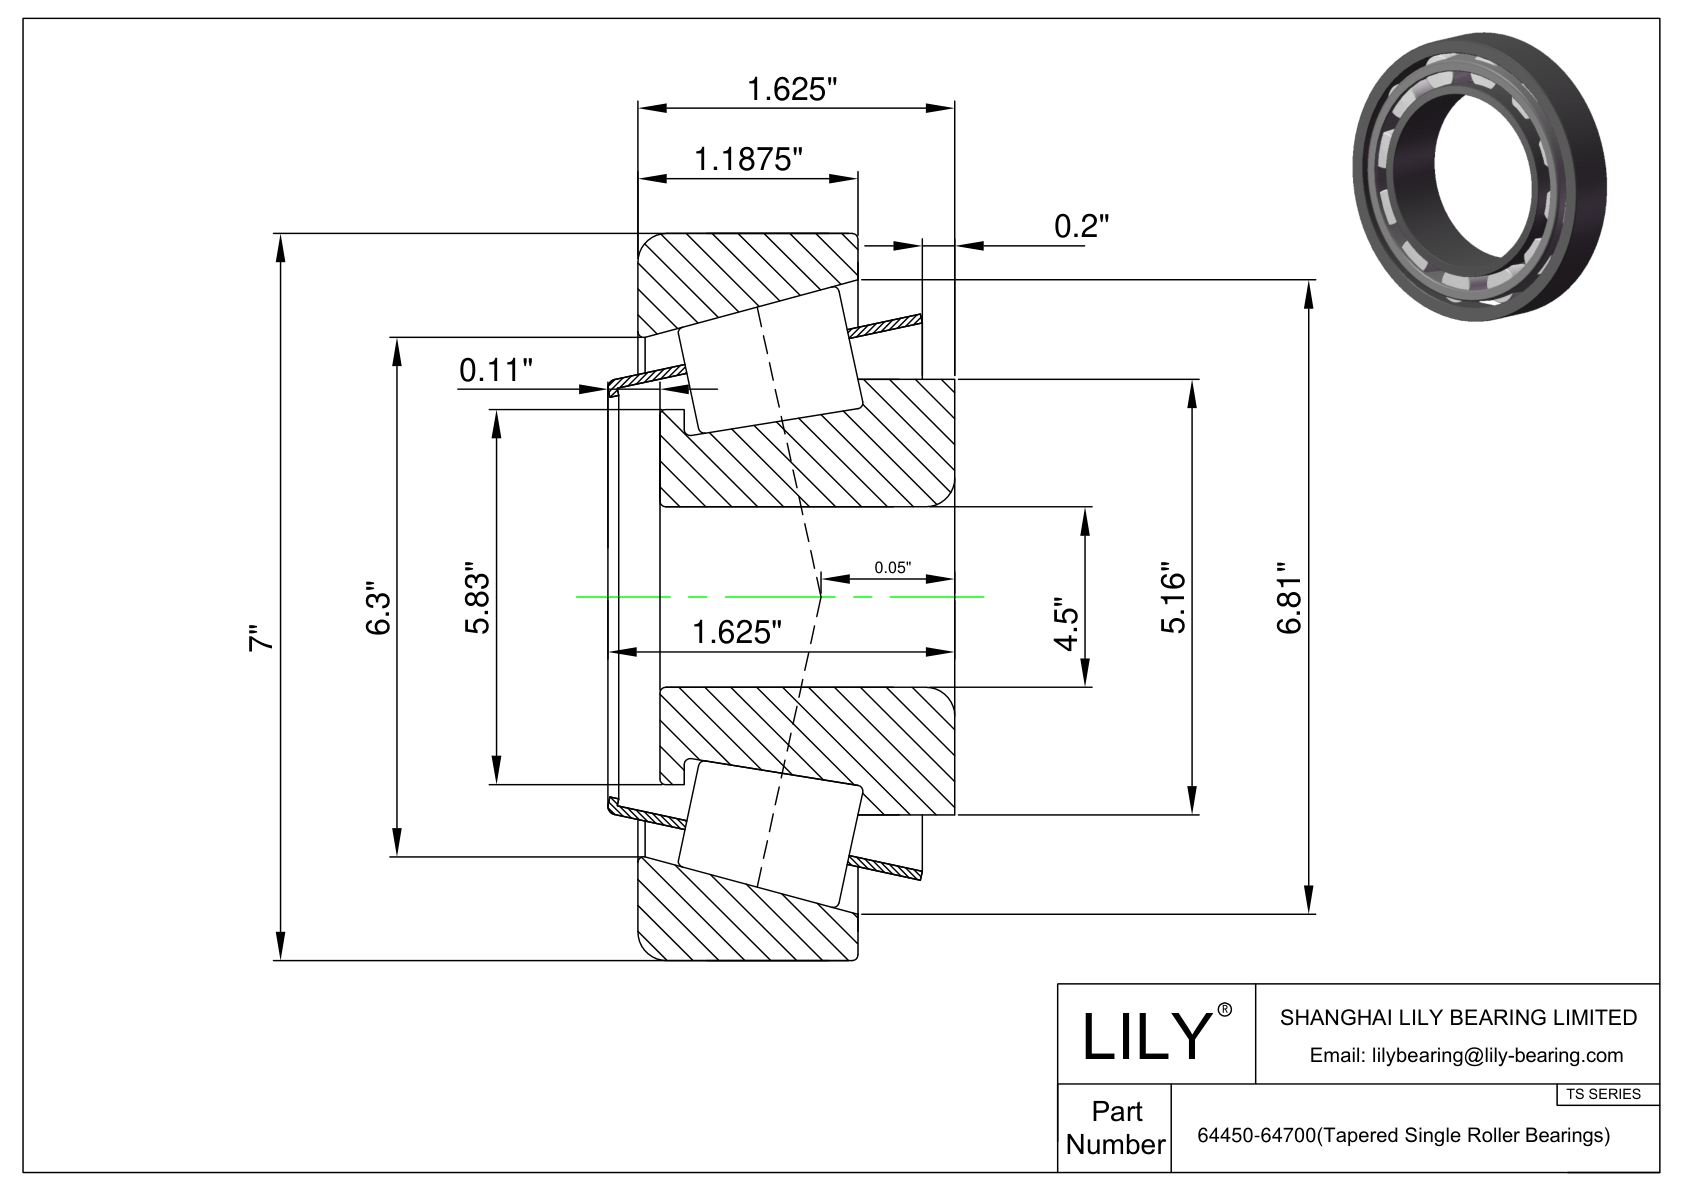 64450-64700 TS (Tapered Single Roller Bearings) (Imperial) cad drawing